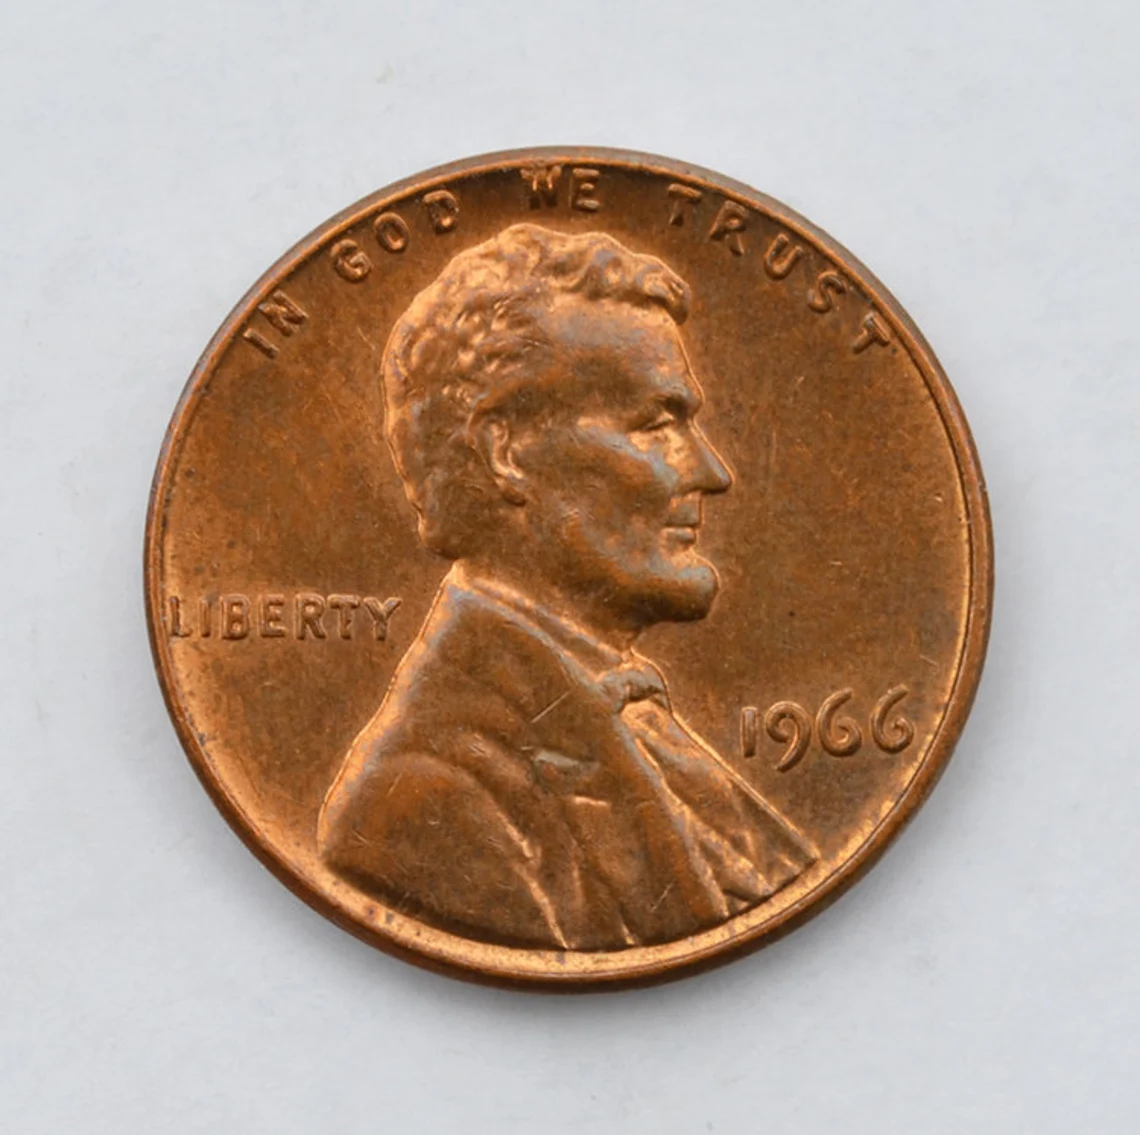 The Obverse of the 1966 Penny